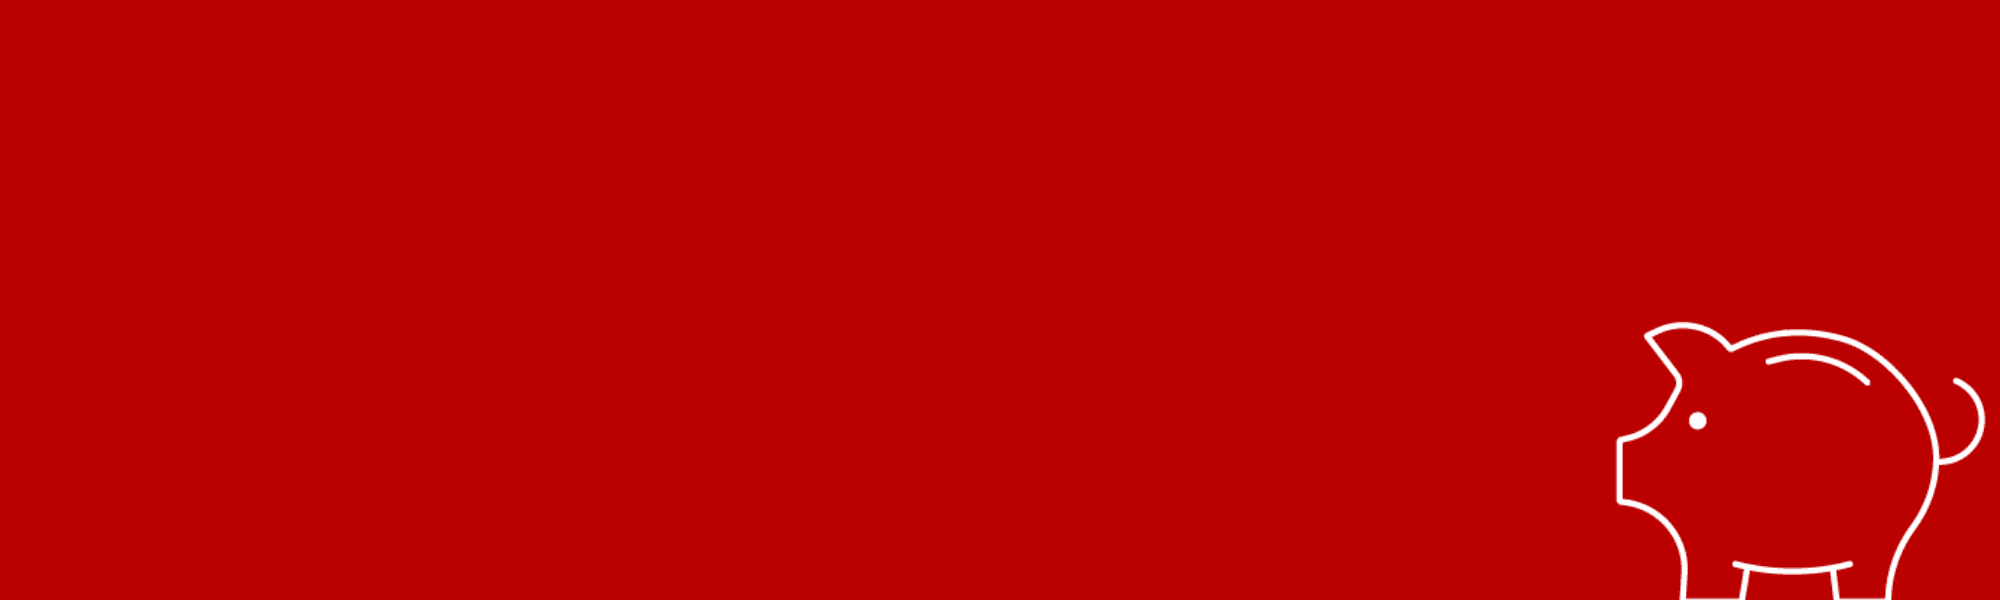 White outline icon of a pig on a red background